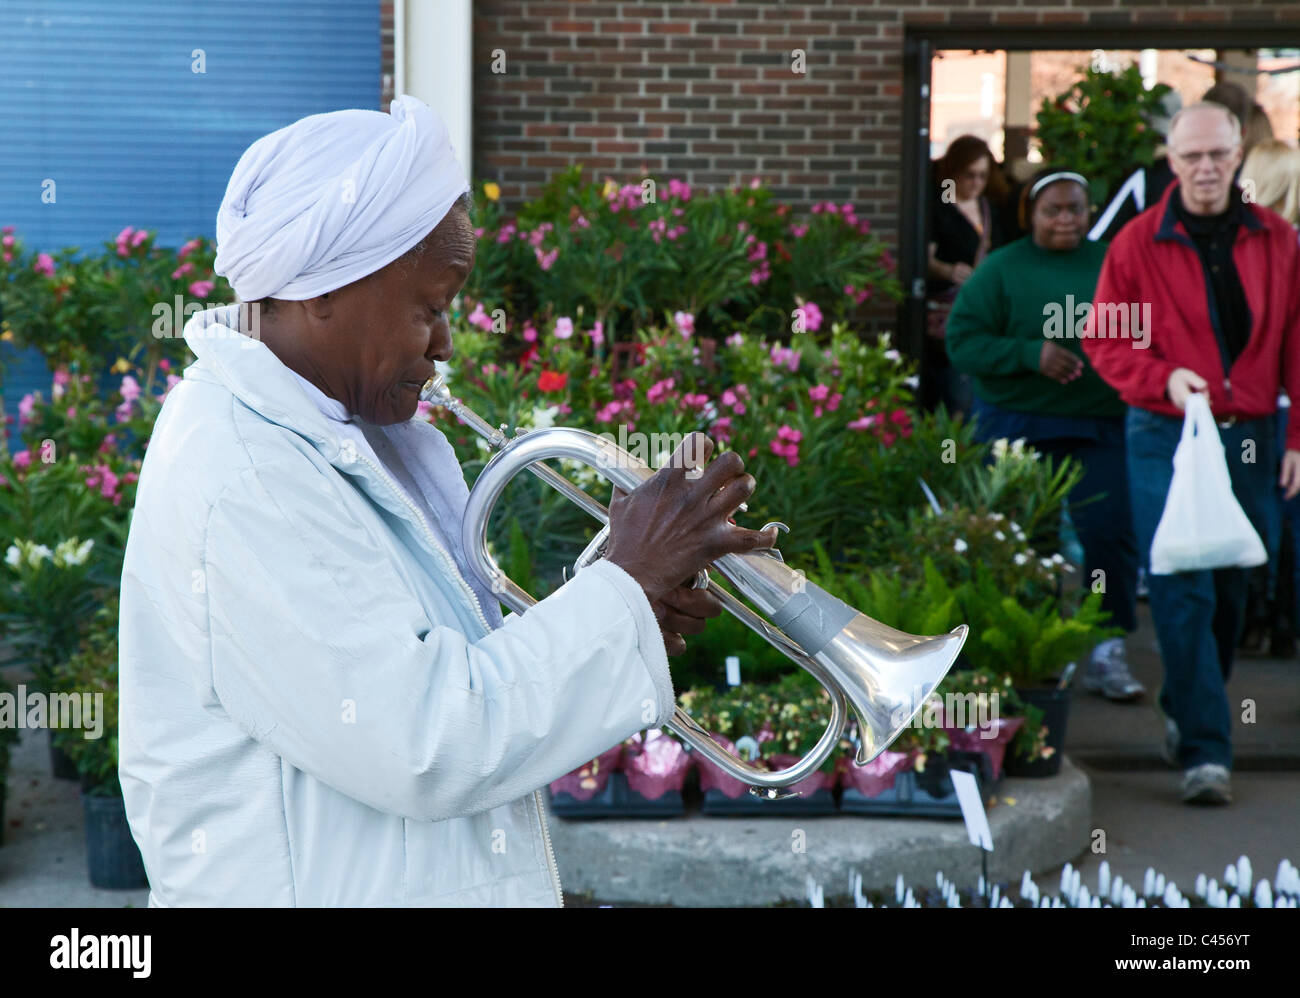 Detroit, Michigan - A woman plays the flugelhorn for tips as shoppers file by at Eastern Market, a farmers' market. Stock Photo